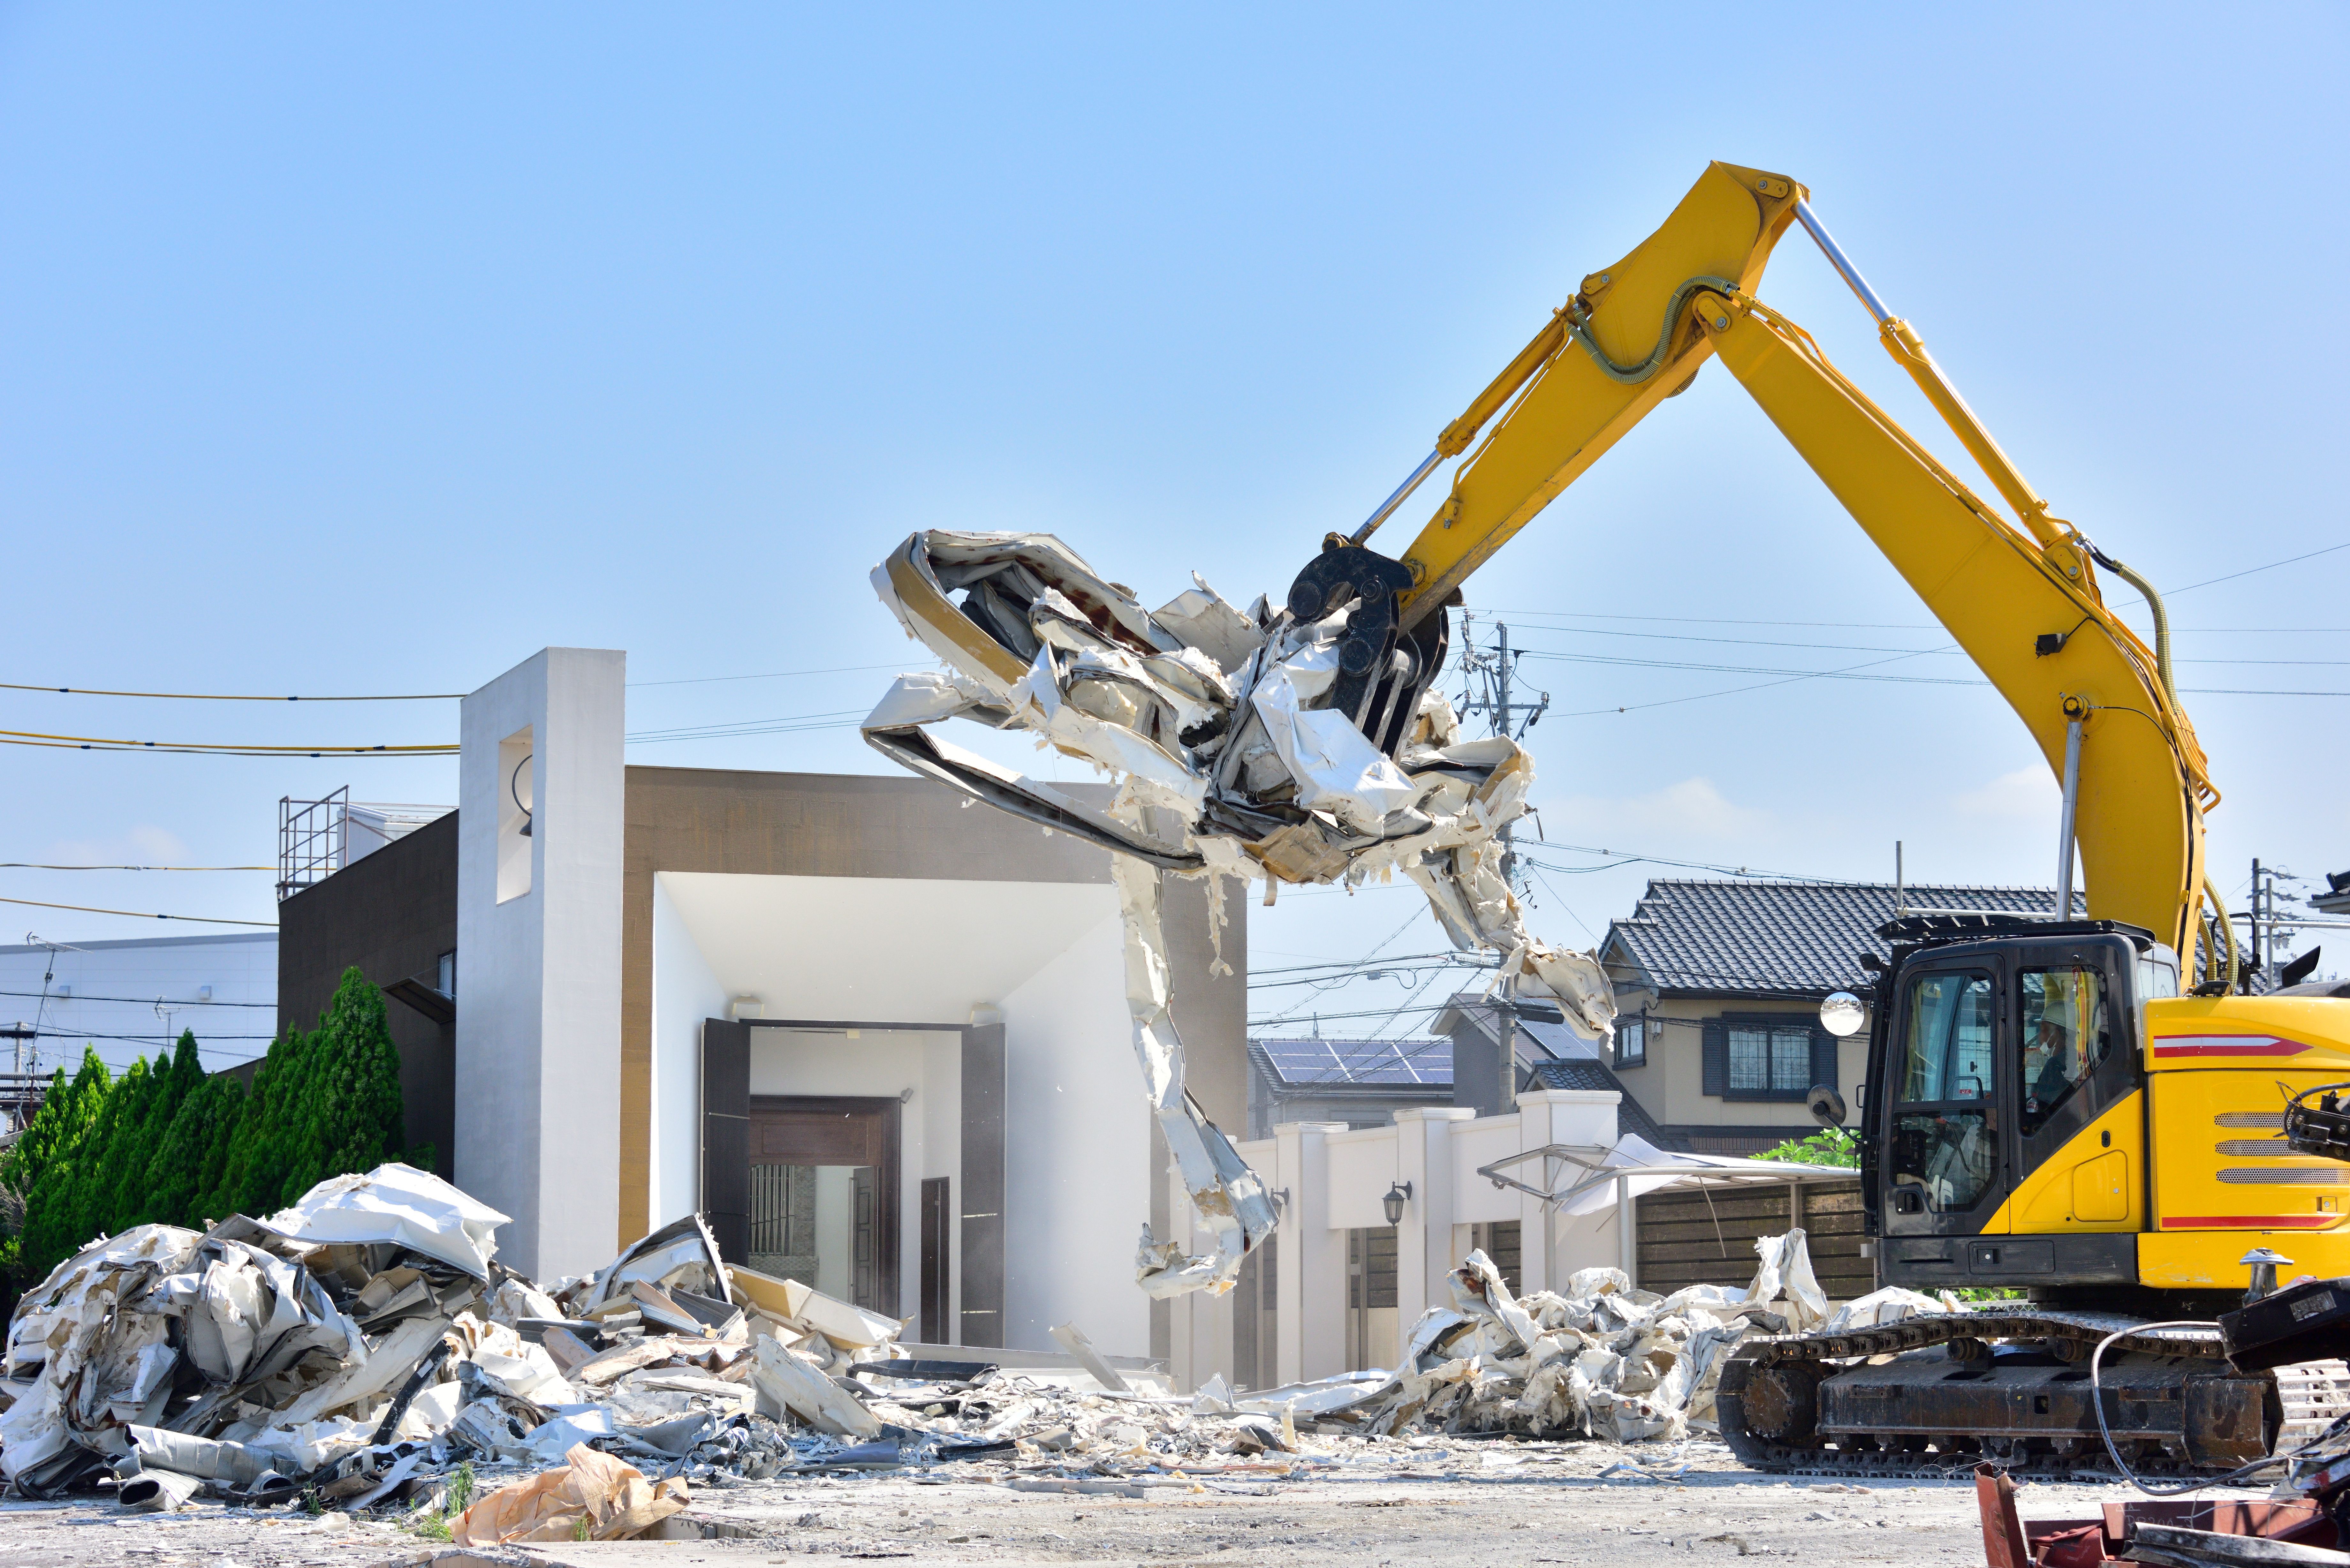 Construction waste is made up of various materials@3x.webp